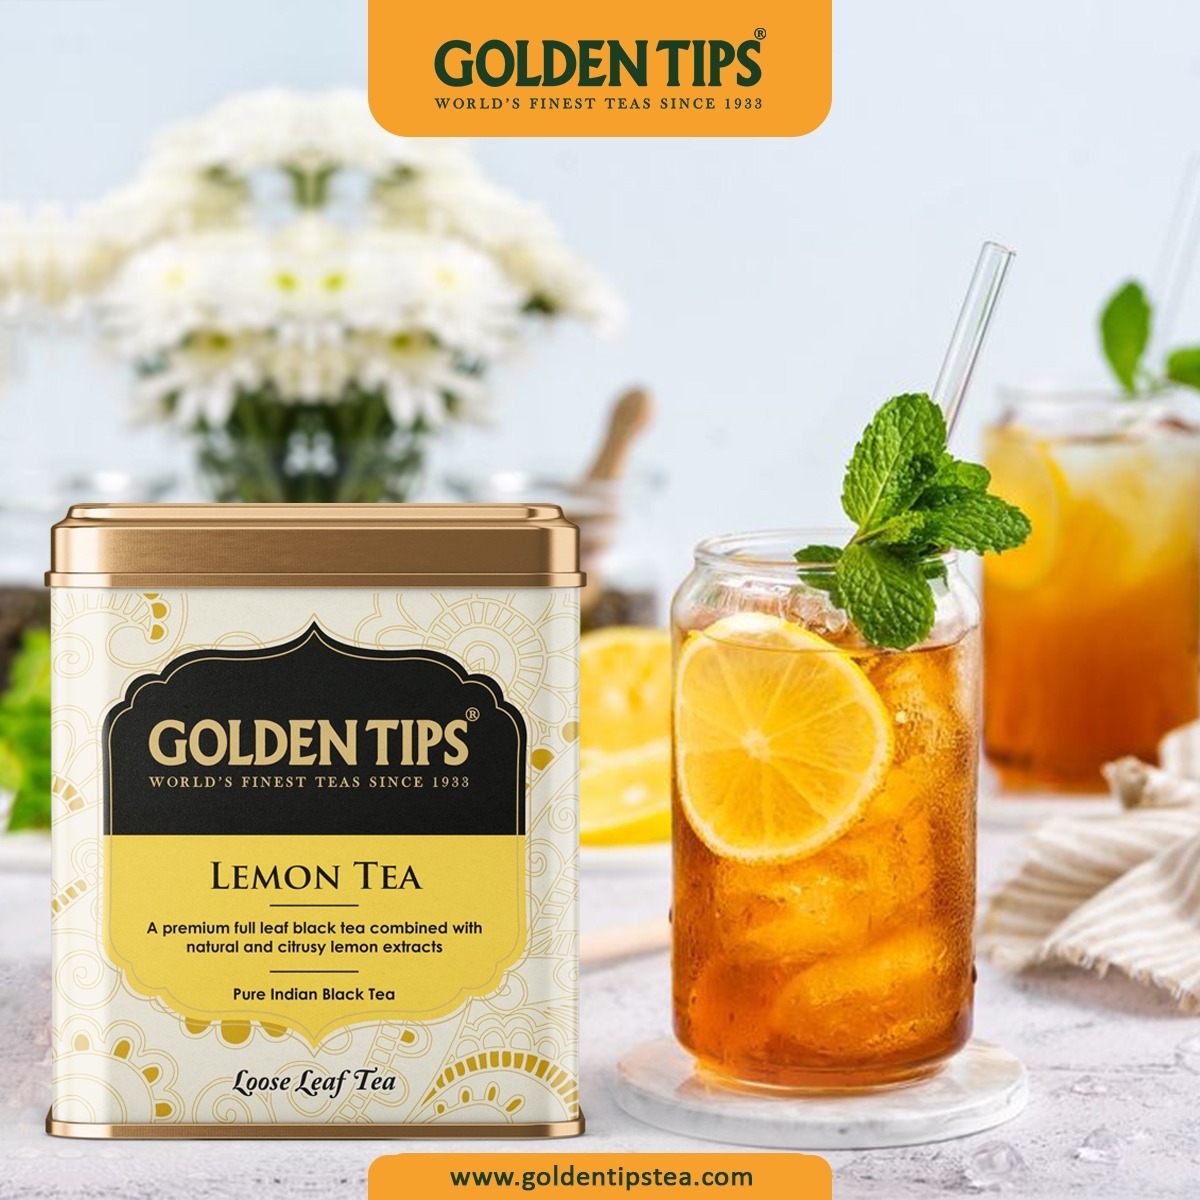 Golden Tips Lemon Black Tea offers a mild aroma and smooth flavor with a citrusy kick. Enjoy it hot or cold for a refreshing treat anytime! 🍋🫖 #GoldenTipsTea #lemmontea # blacktea #flavor #cold #coldtea #refreshing